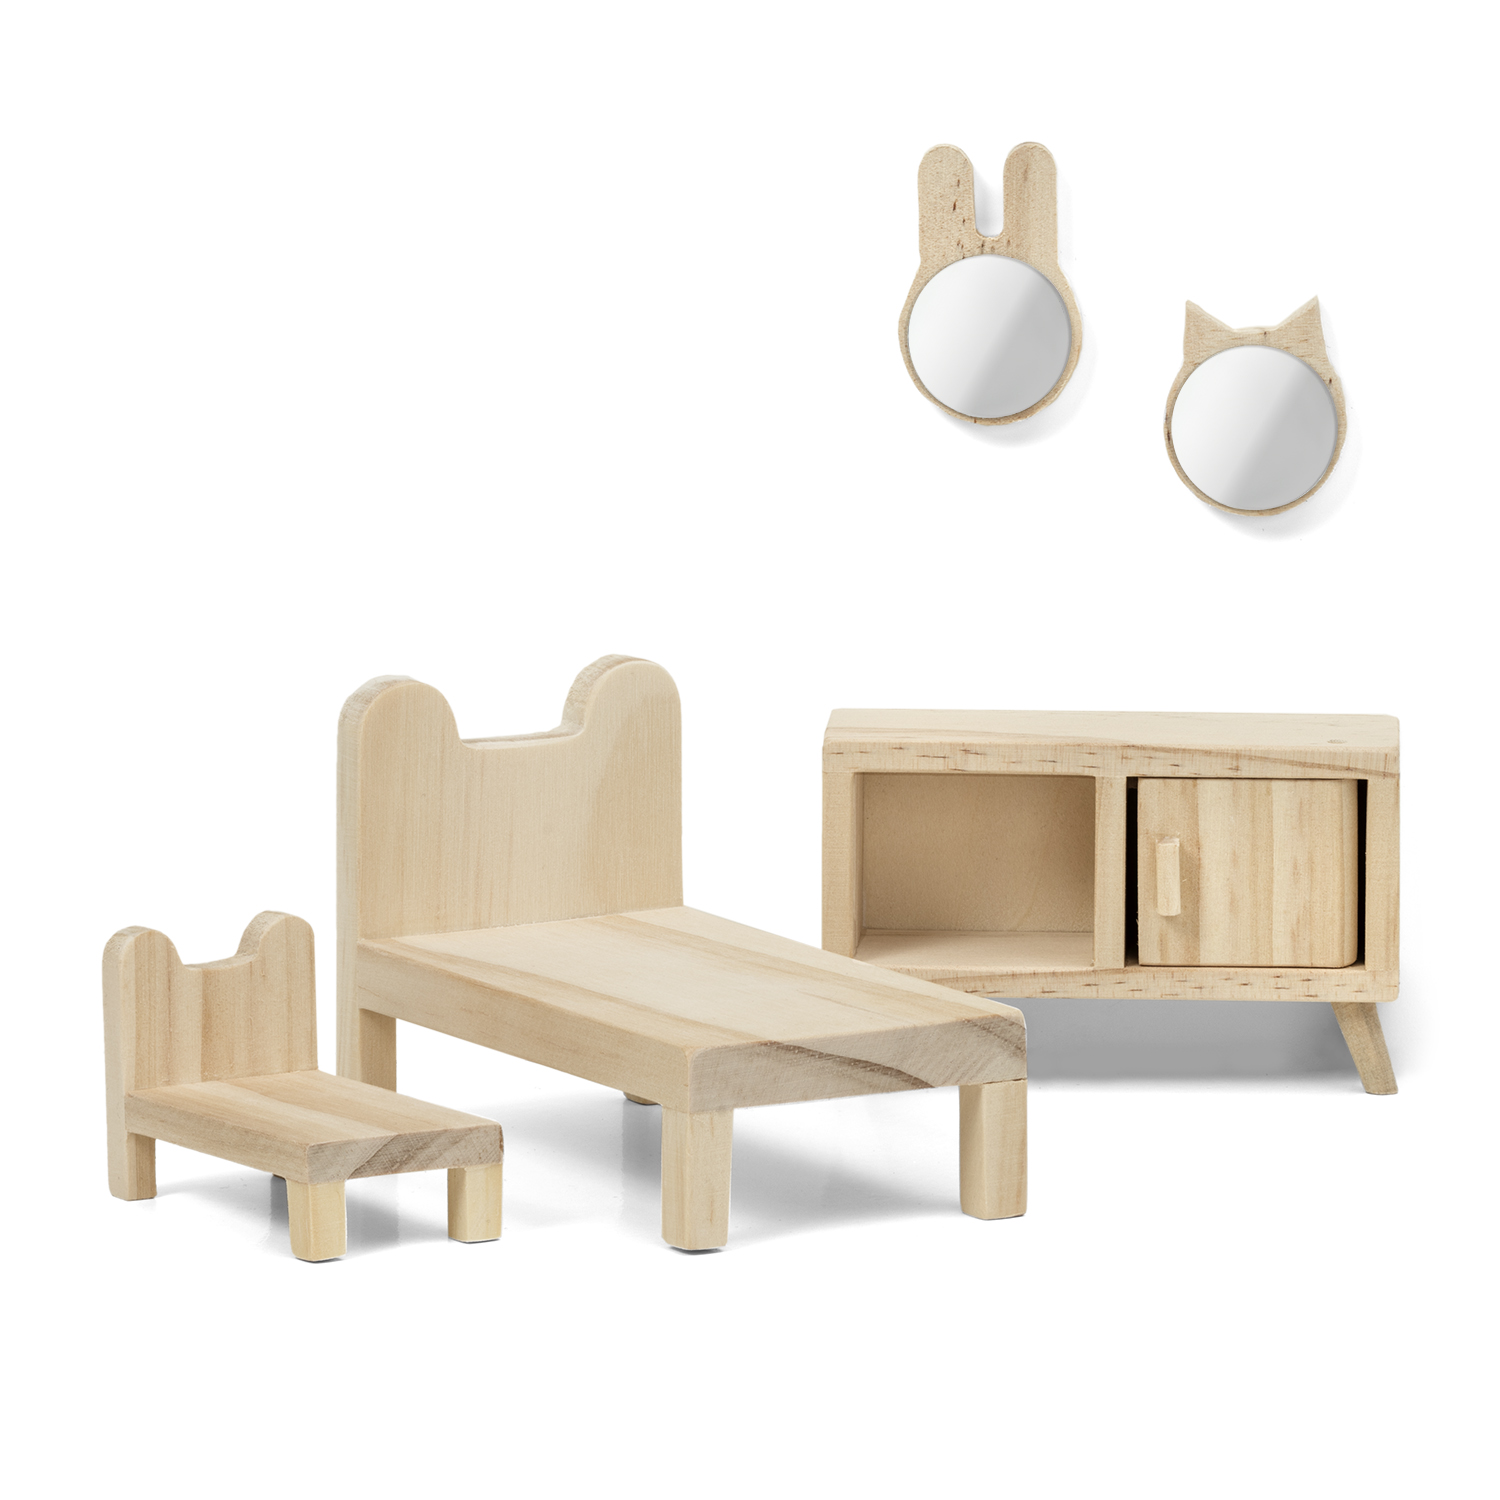 Wooden toys lundby dollhouse furniture bedroom set natural wood